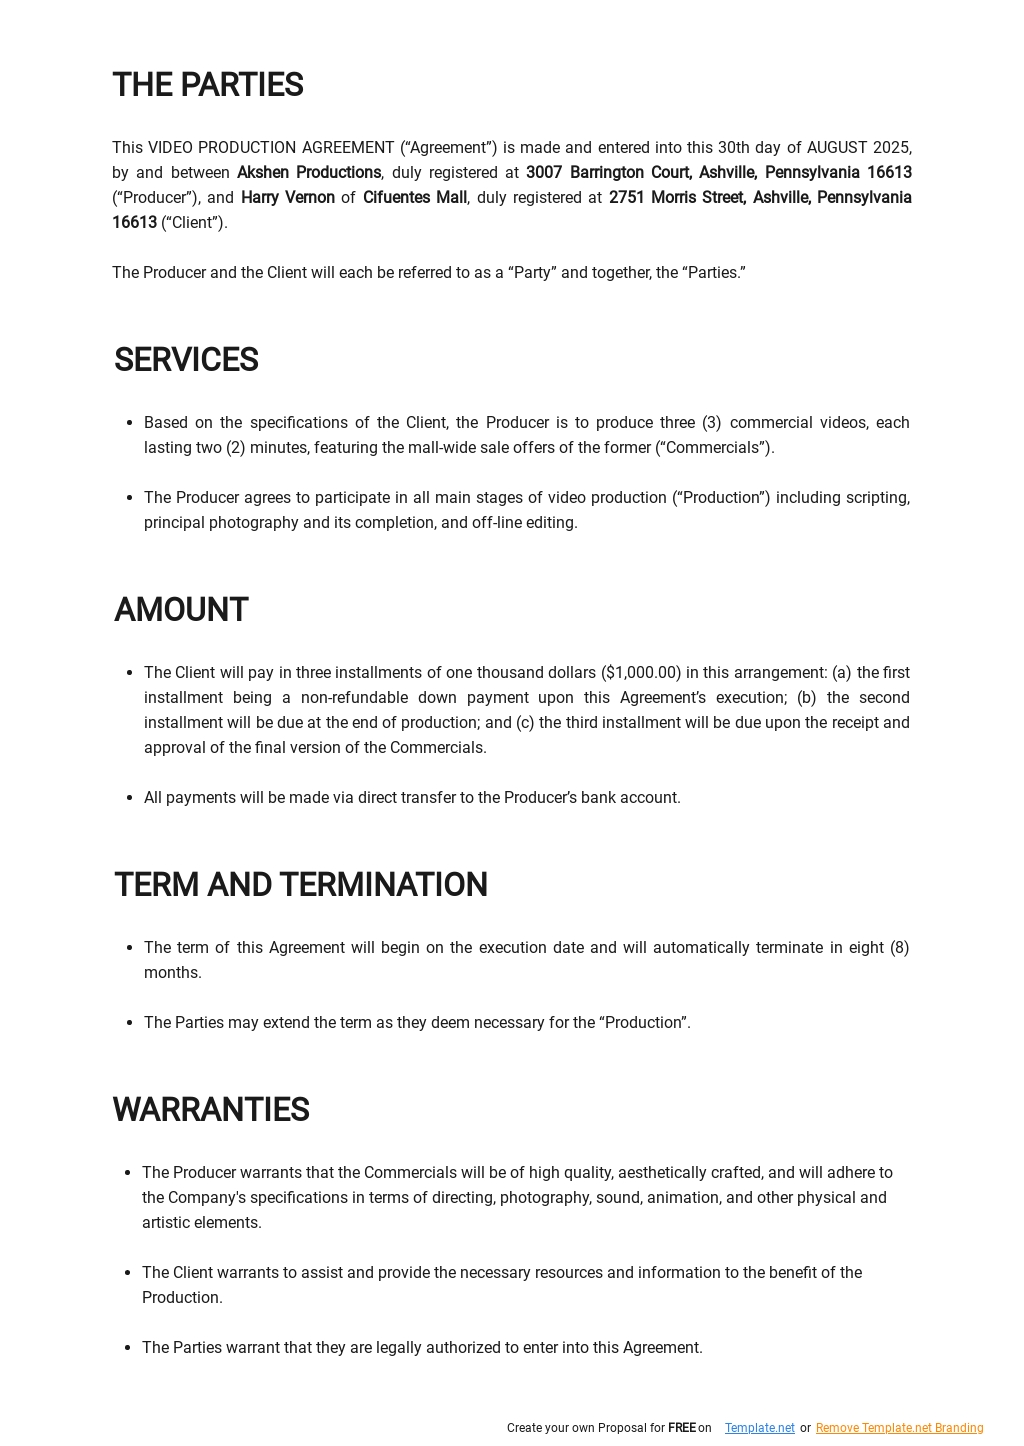 Video Production Agreement Template 1.jpe